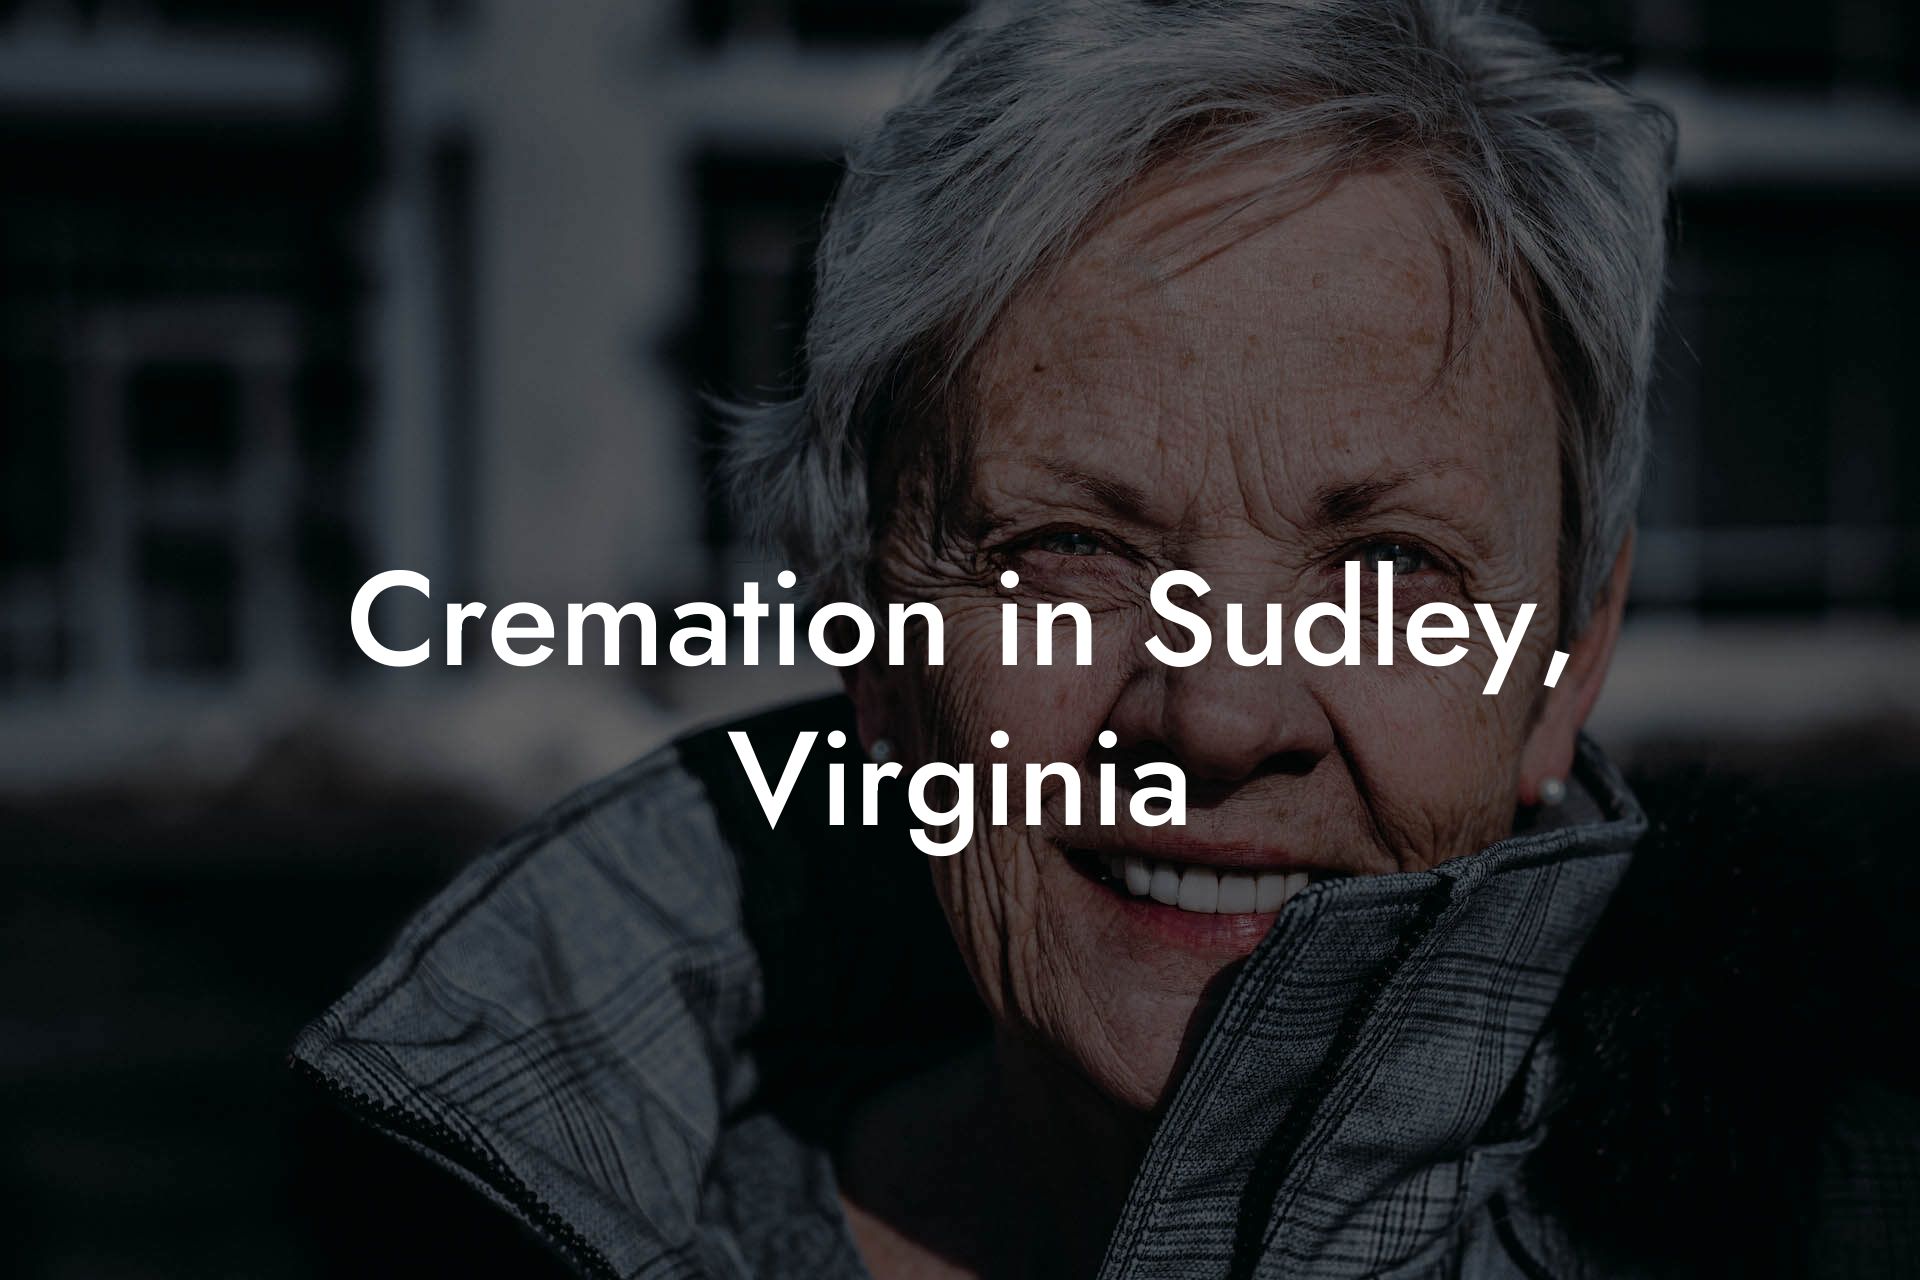 Cremation in Sudley, Virginia